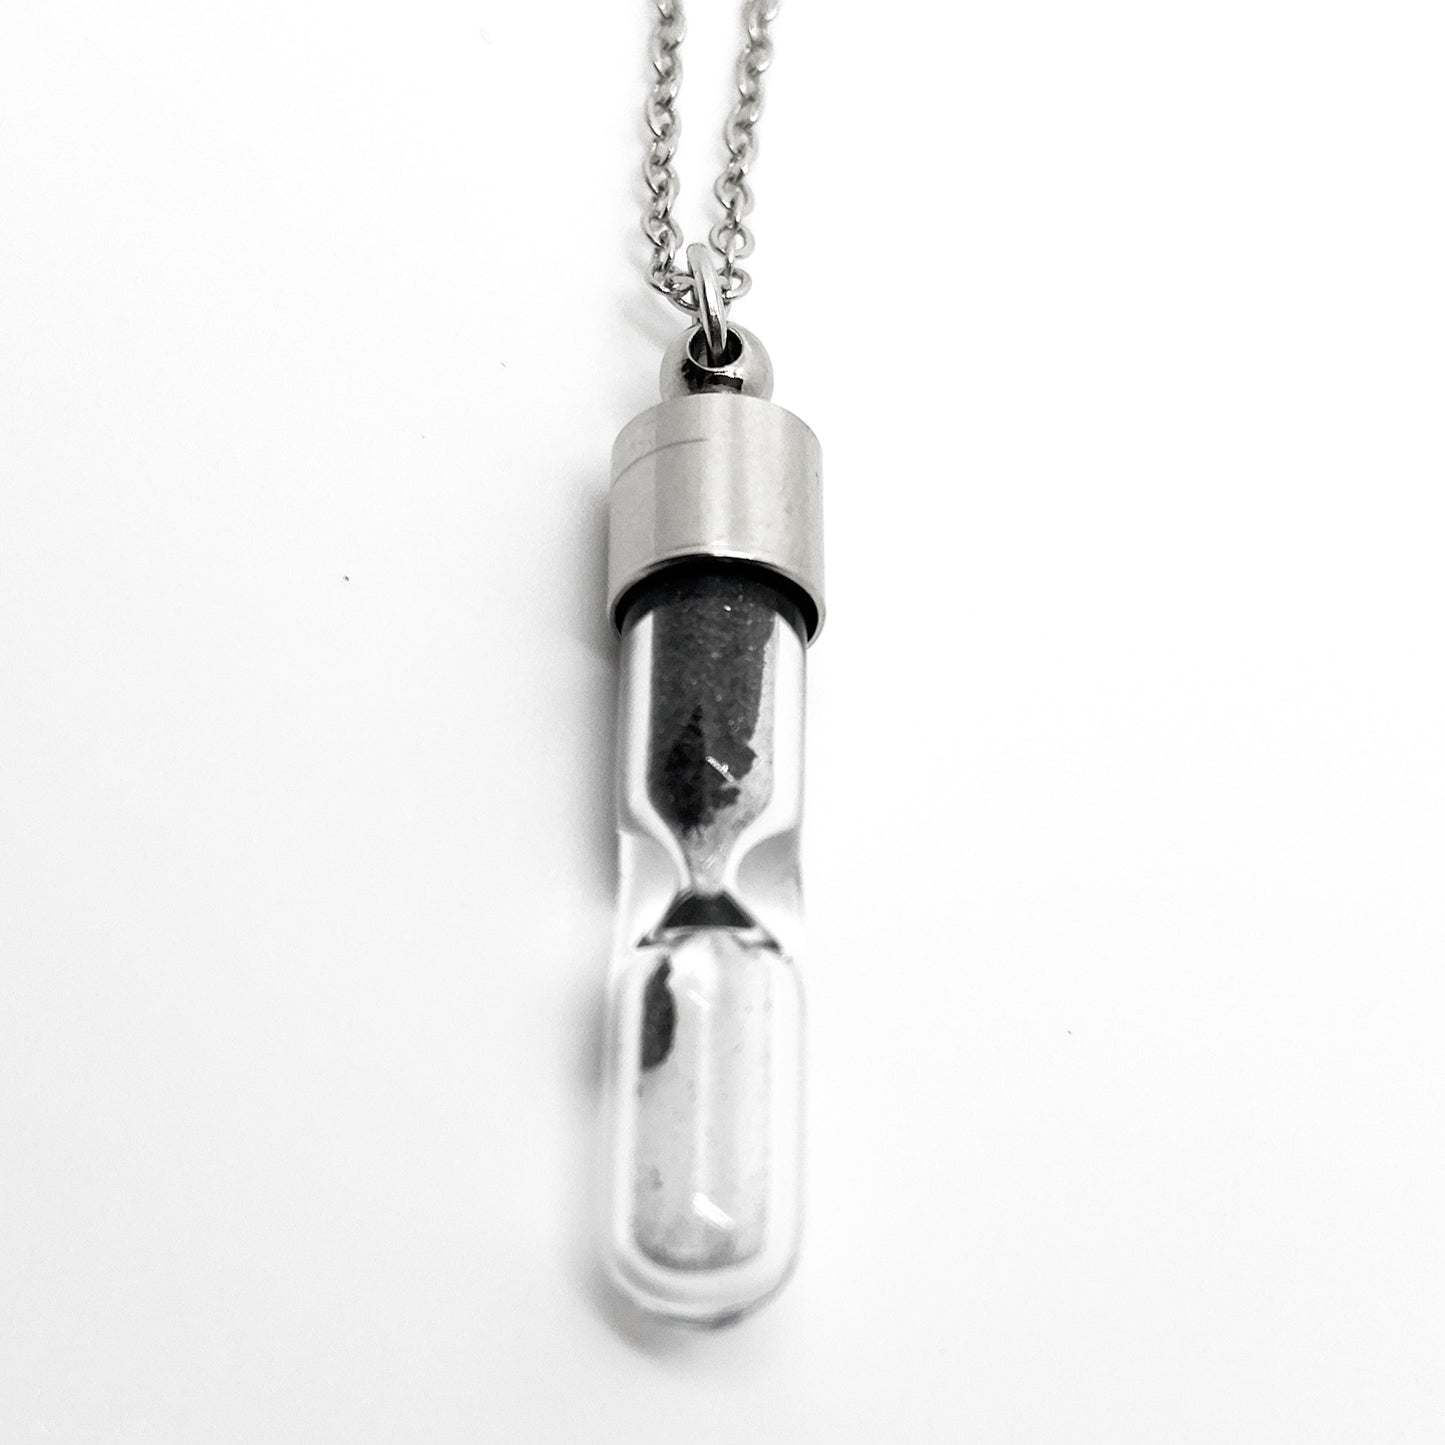 Space Time Hourglass Necklace with Meteorite Dust Necklace Yugen Handmade   